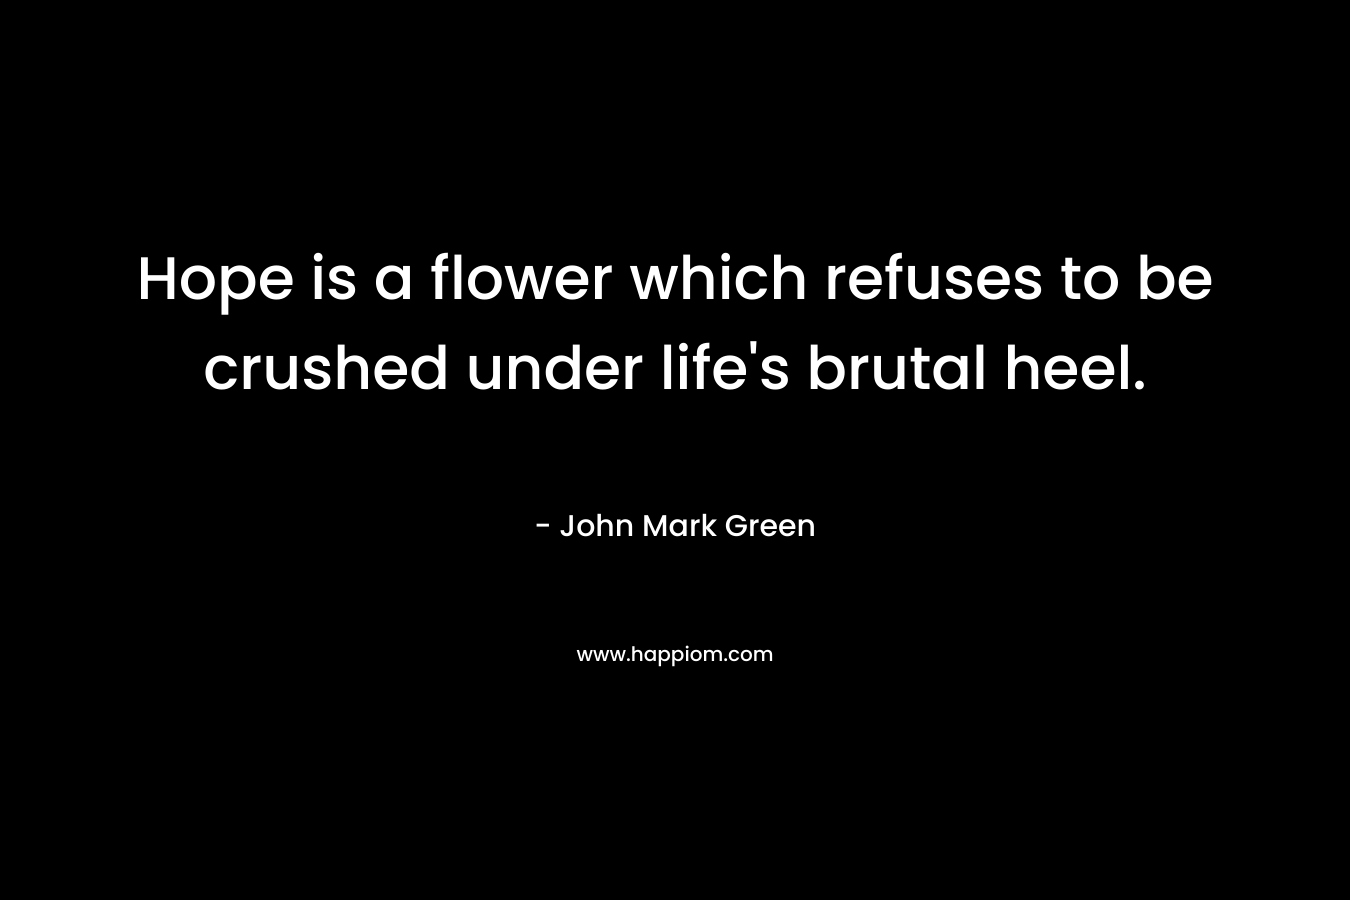 Hope is a flower which refuses to be crushed under life’s brutal heel. – John Mark Green